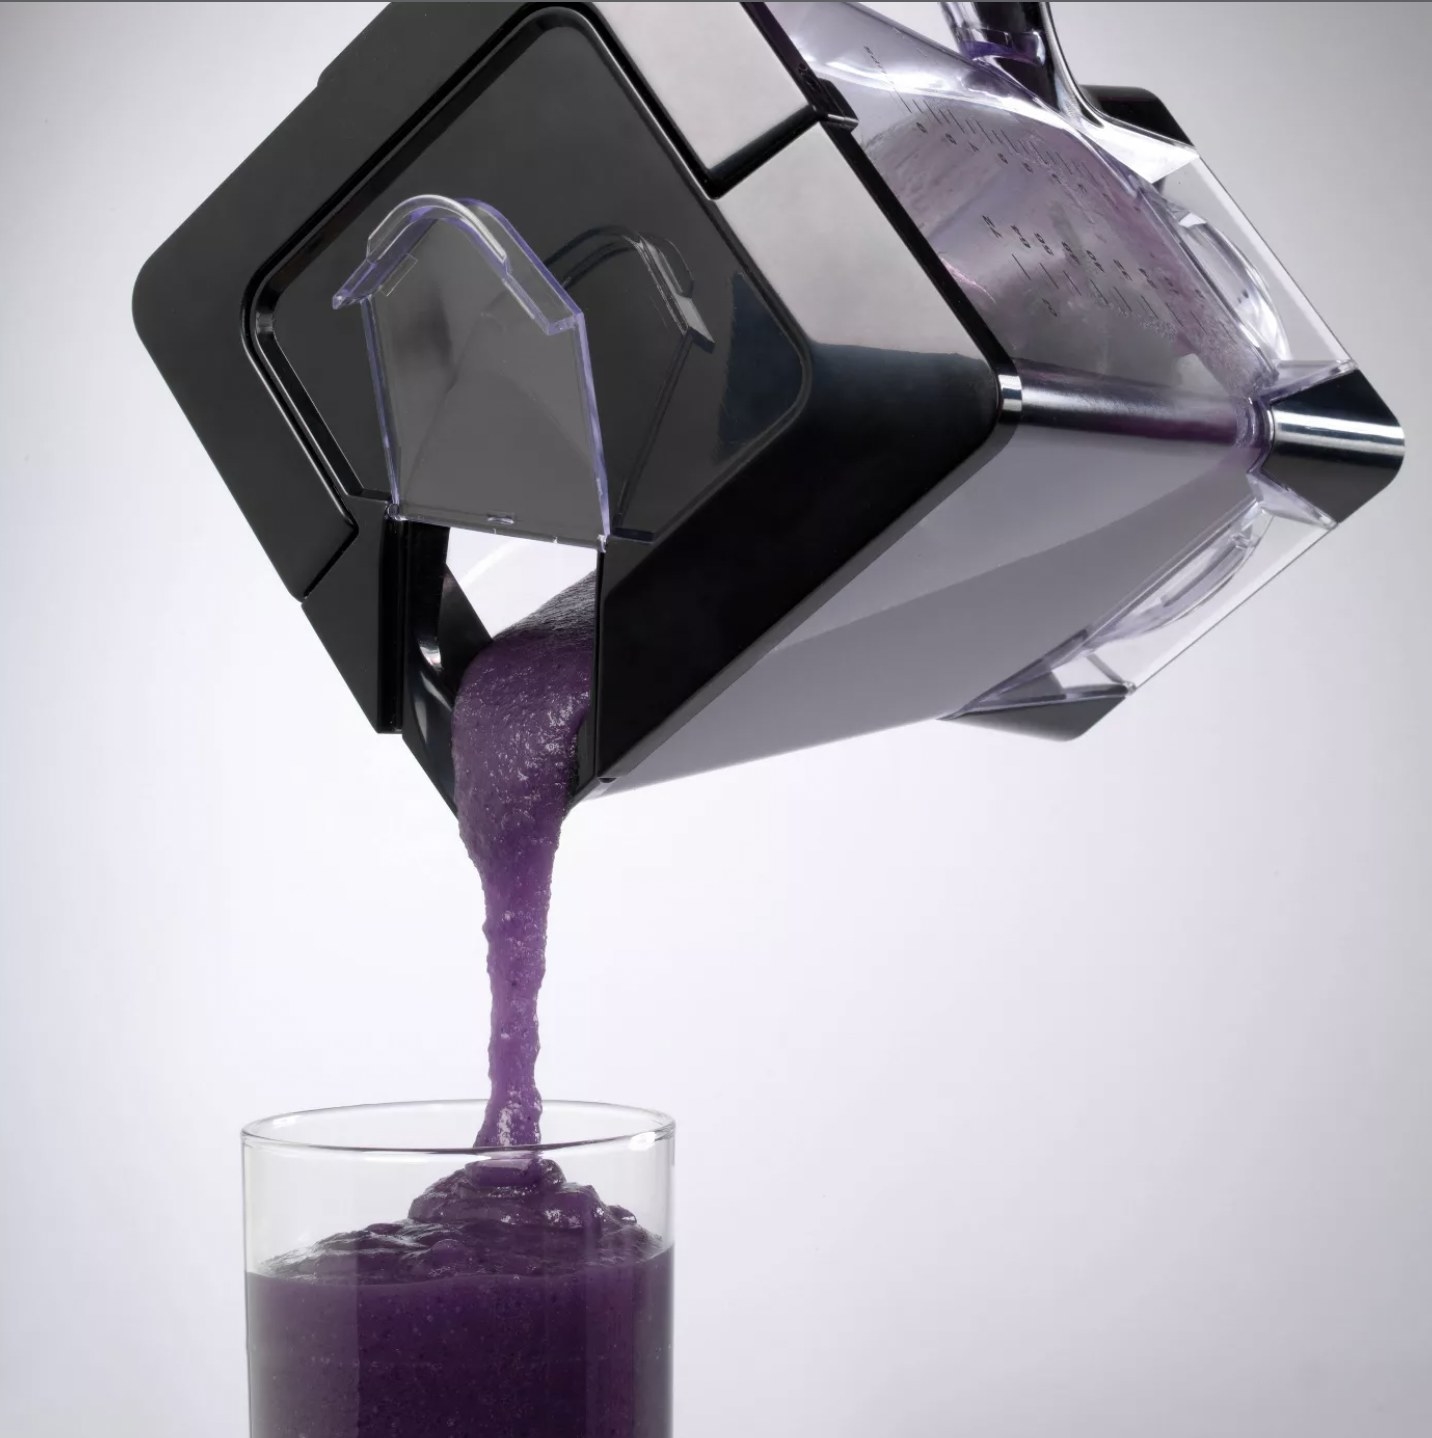 The blender pouring a purple smoothie into a glass